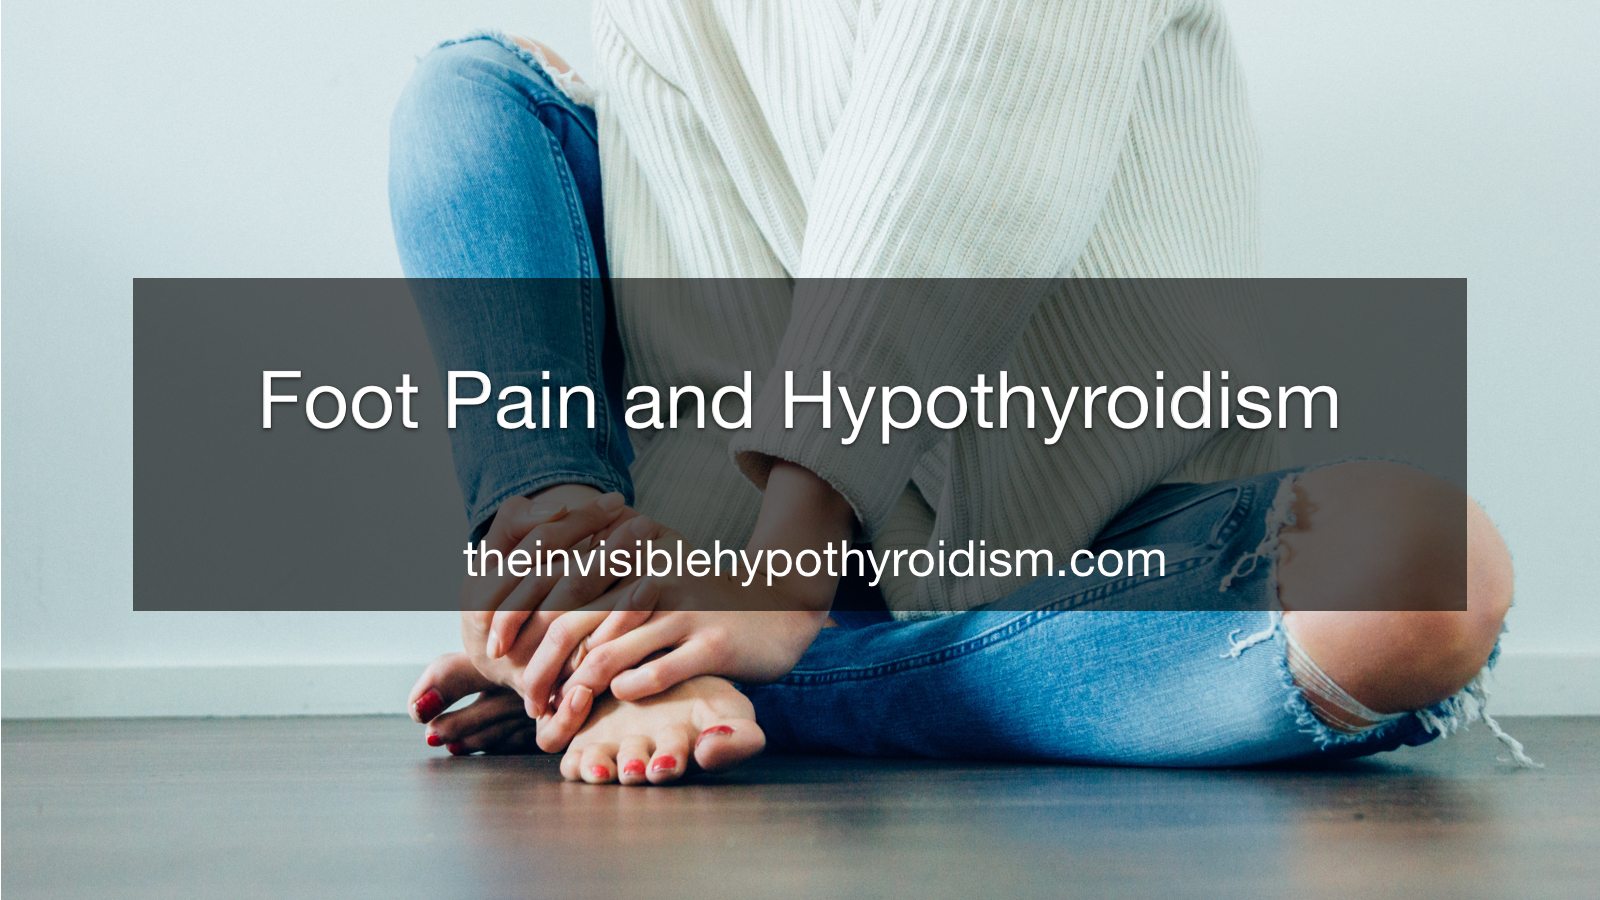 Foot Pain and Hypothyroidism